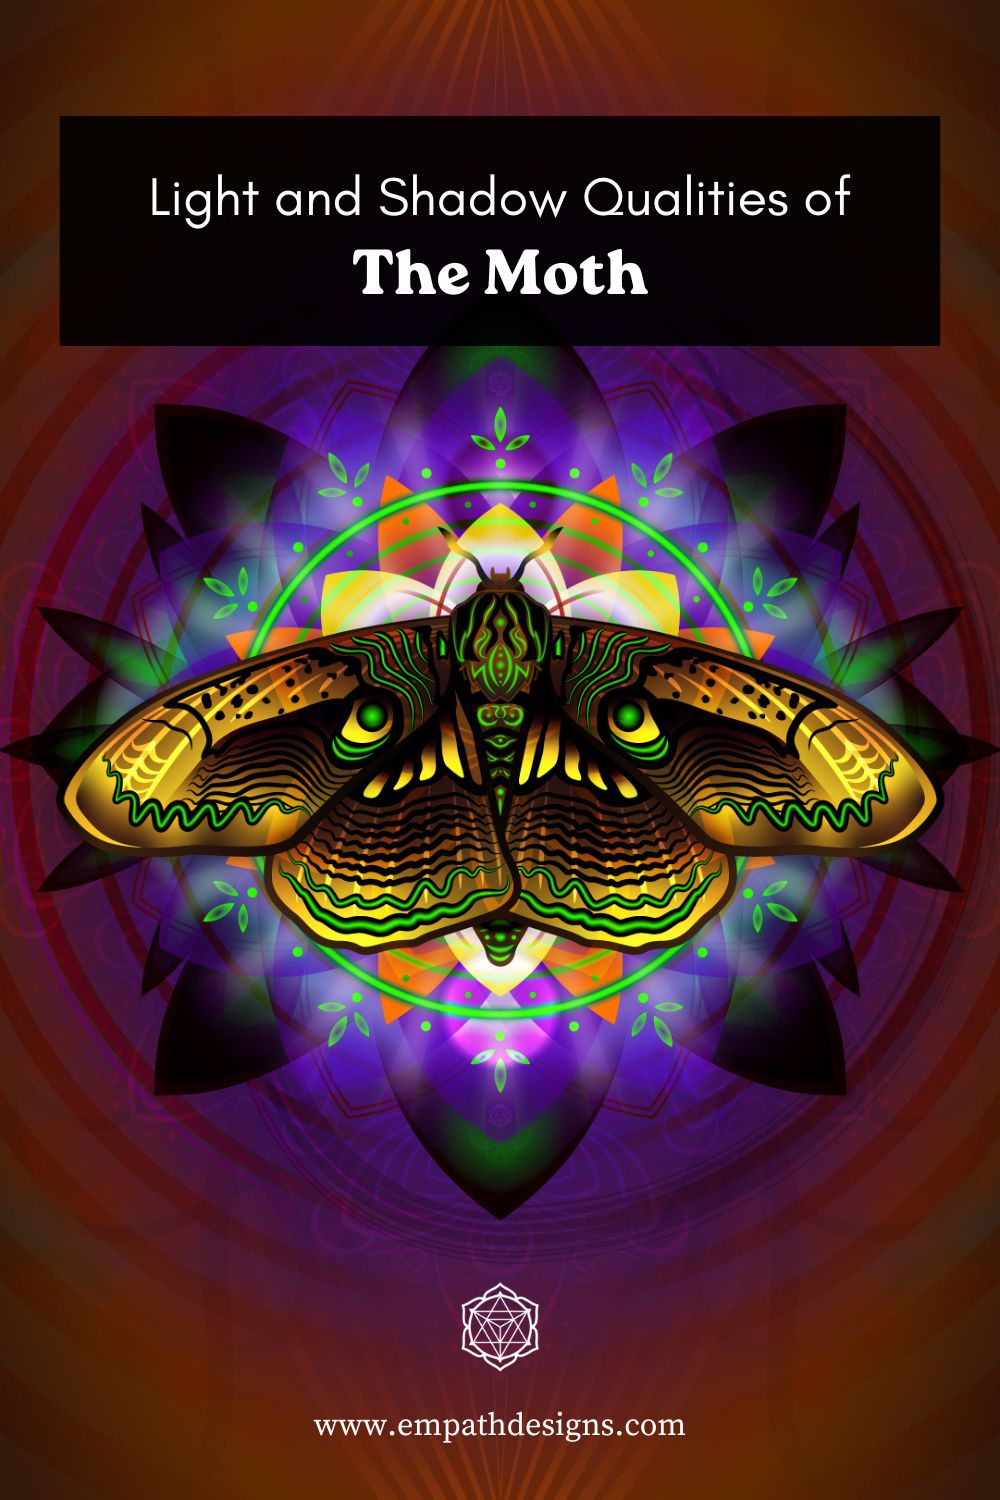 Light and Shadow Qualities of the Moth